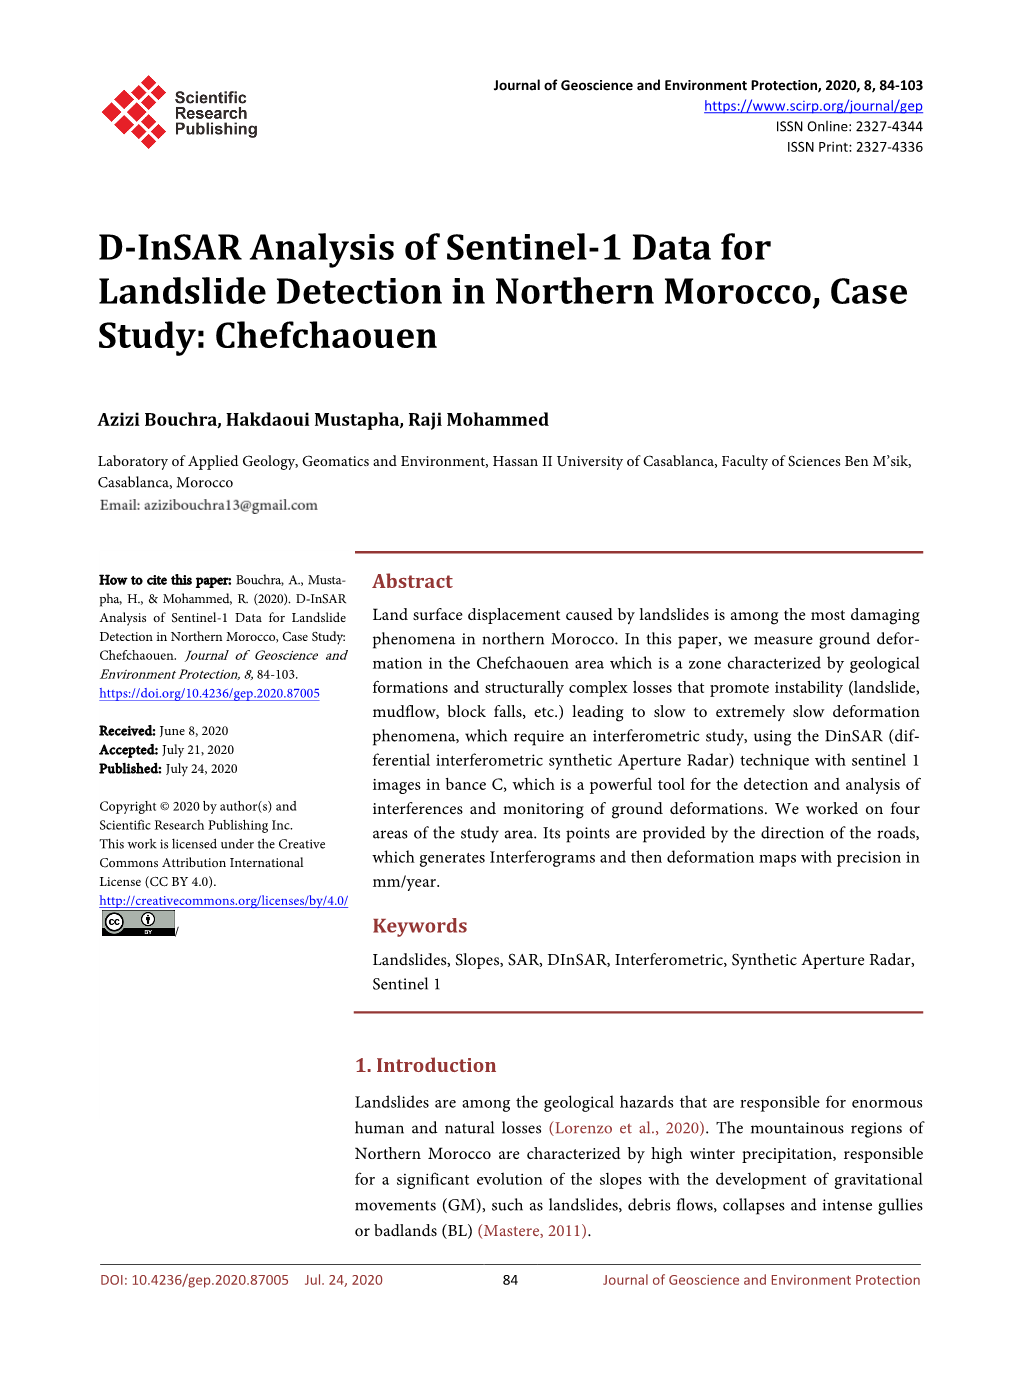 D-Insar Analysis of Sentinel-1 Data for Landslide Detection in Northern Morocco, Case Study: Chefchaouen